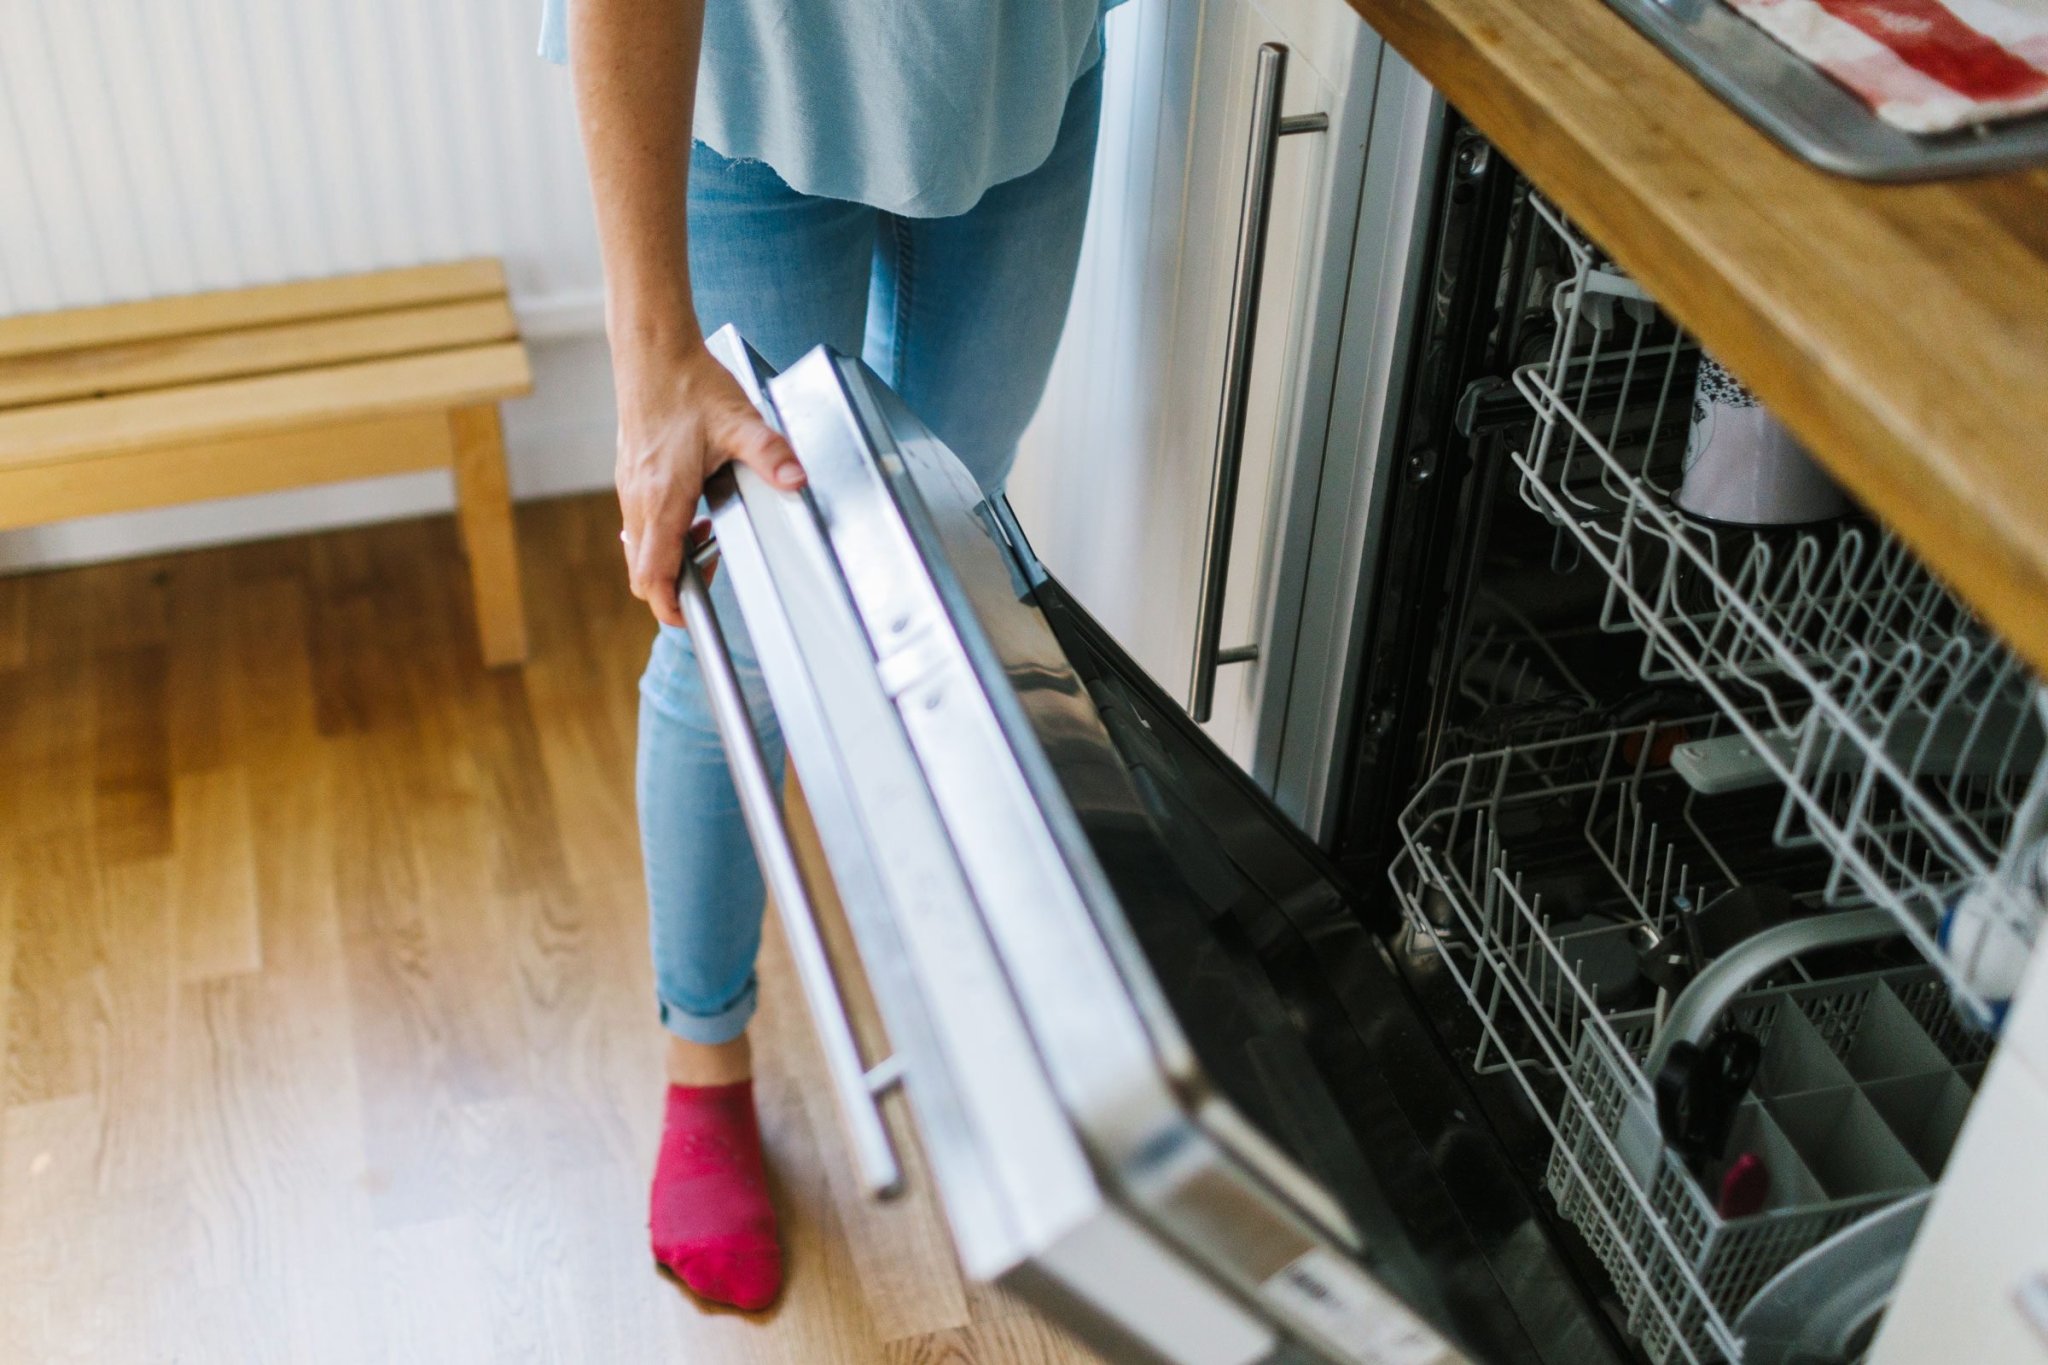 13 Things You Never Knew You Could Put in the Dishwasher